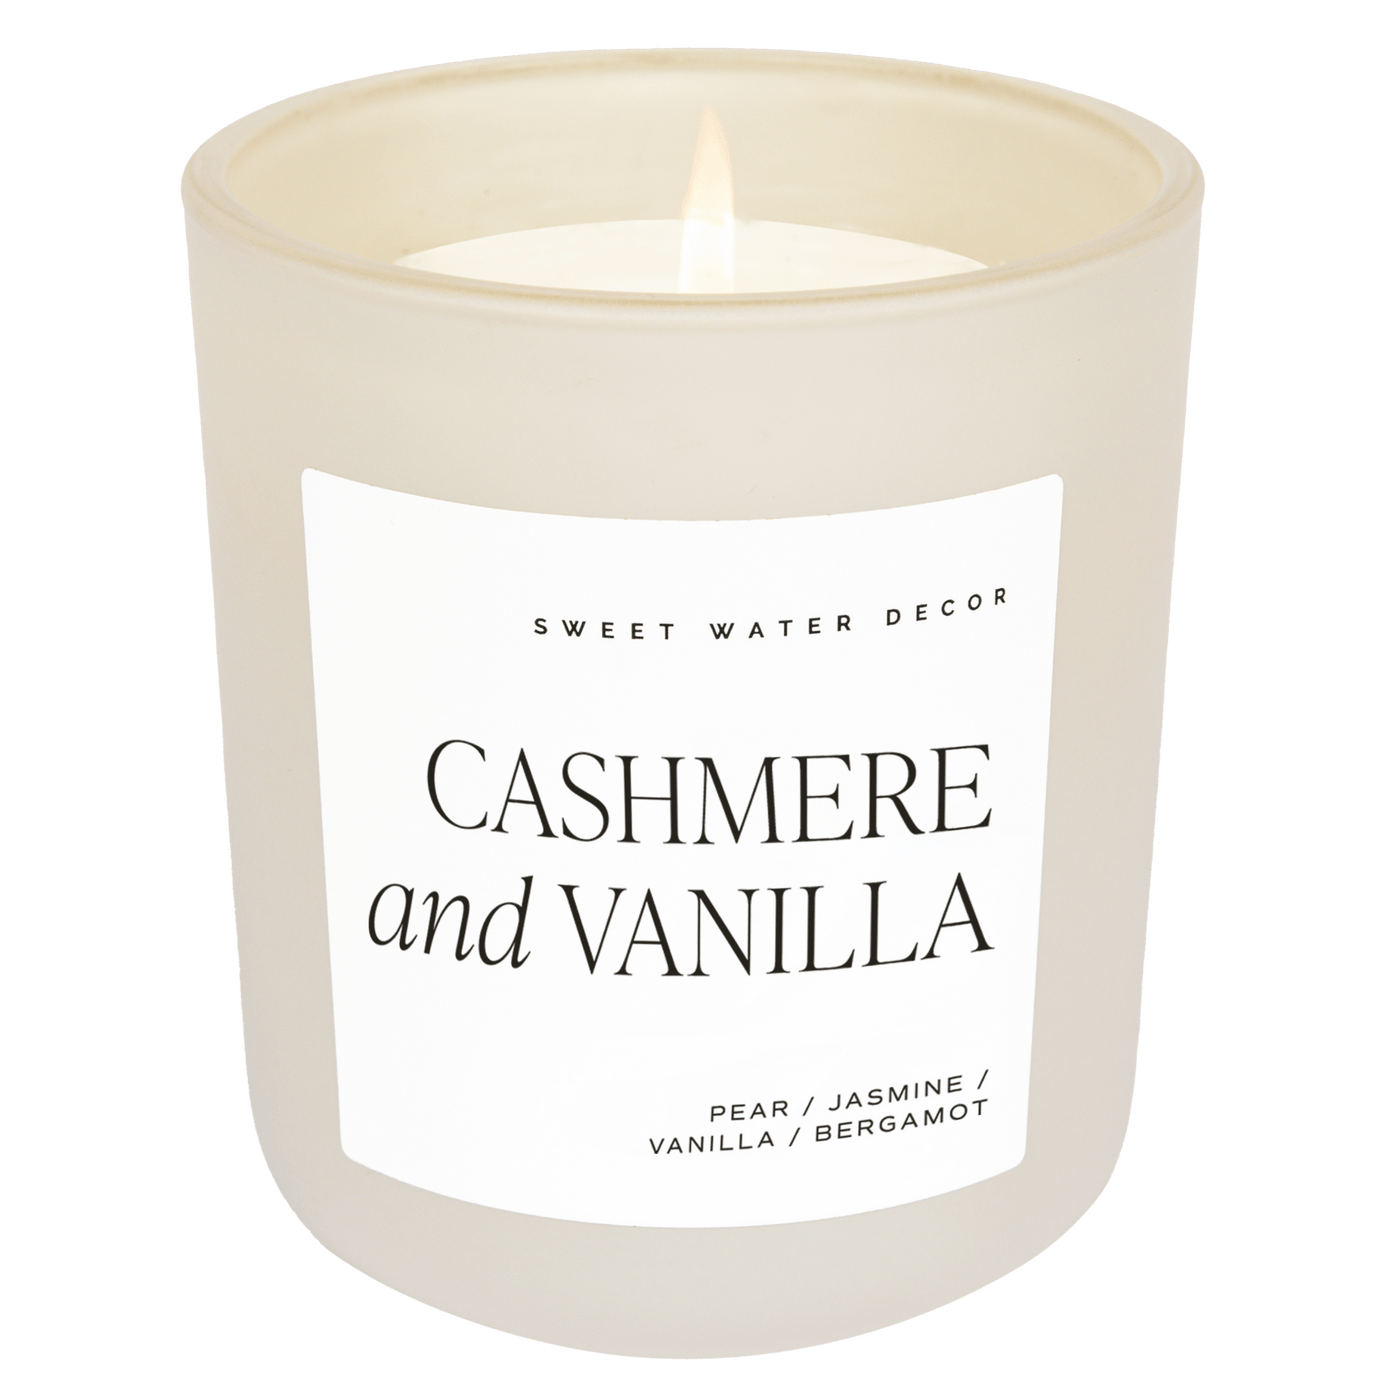 Cashmere and Vanilla Soy Candle - Tan Matte Jar - 15 oz - Sweet Water Decor - Candles